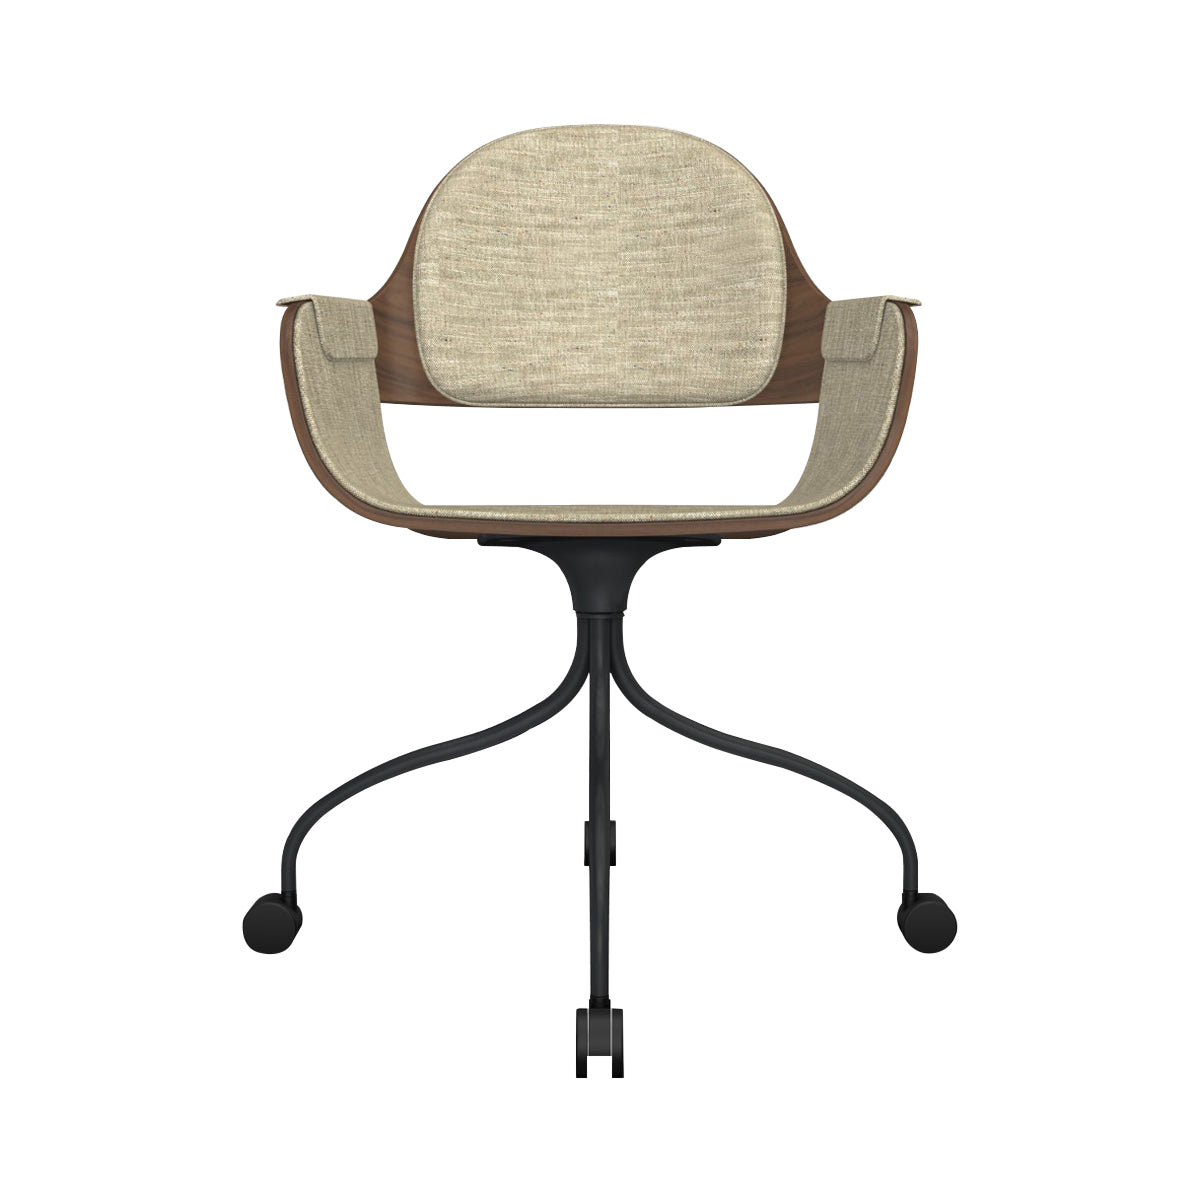 Showtime Nude Chair with Wheel: Interior Seat + Backrest Cushion + Walnut + Anthracite Grey